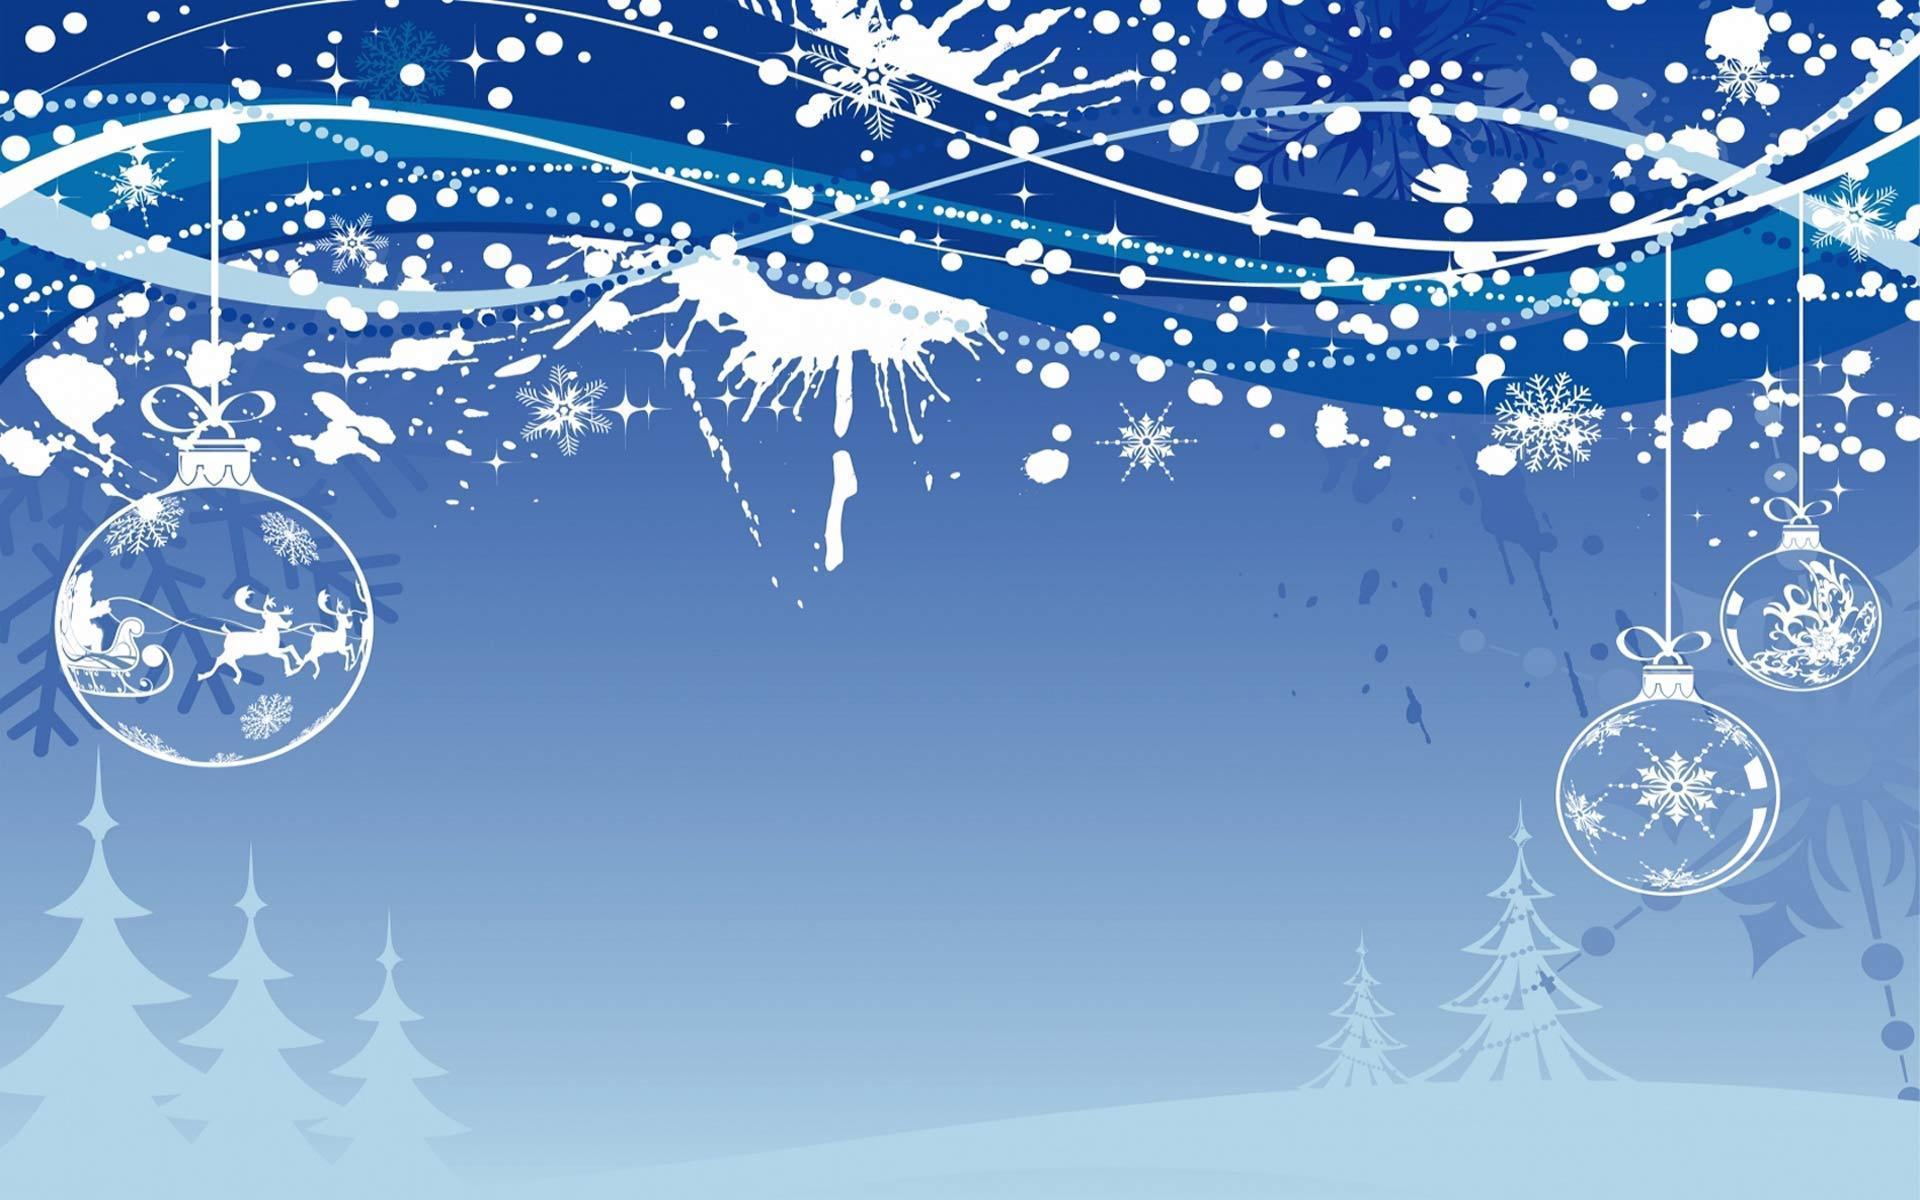 Free Christmas Wallpapers for Desktop HD Backgrounds Download With